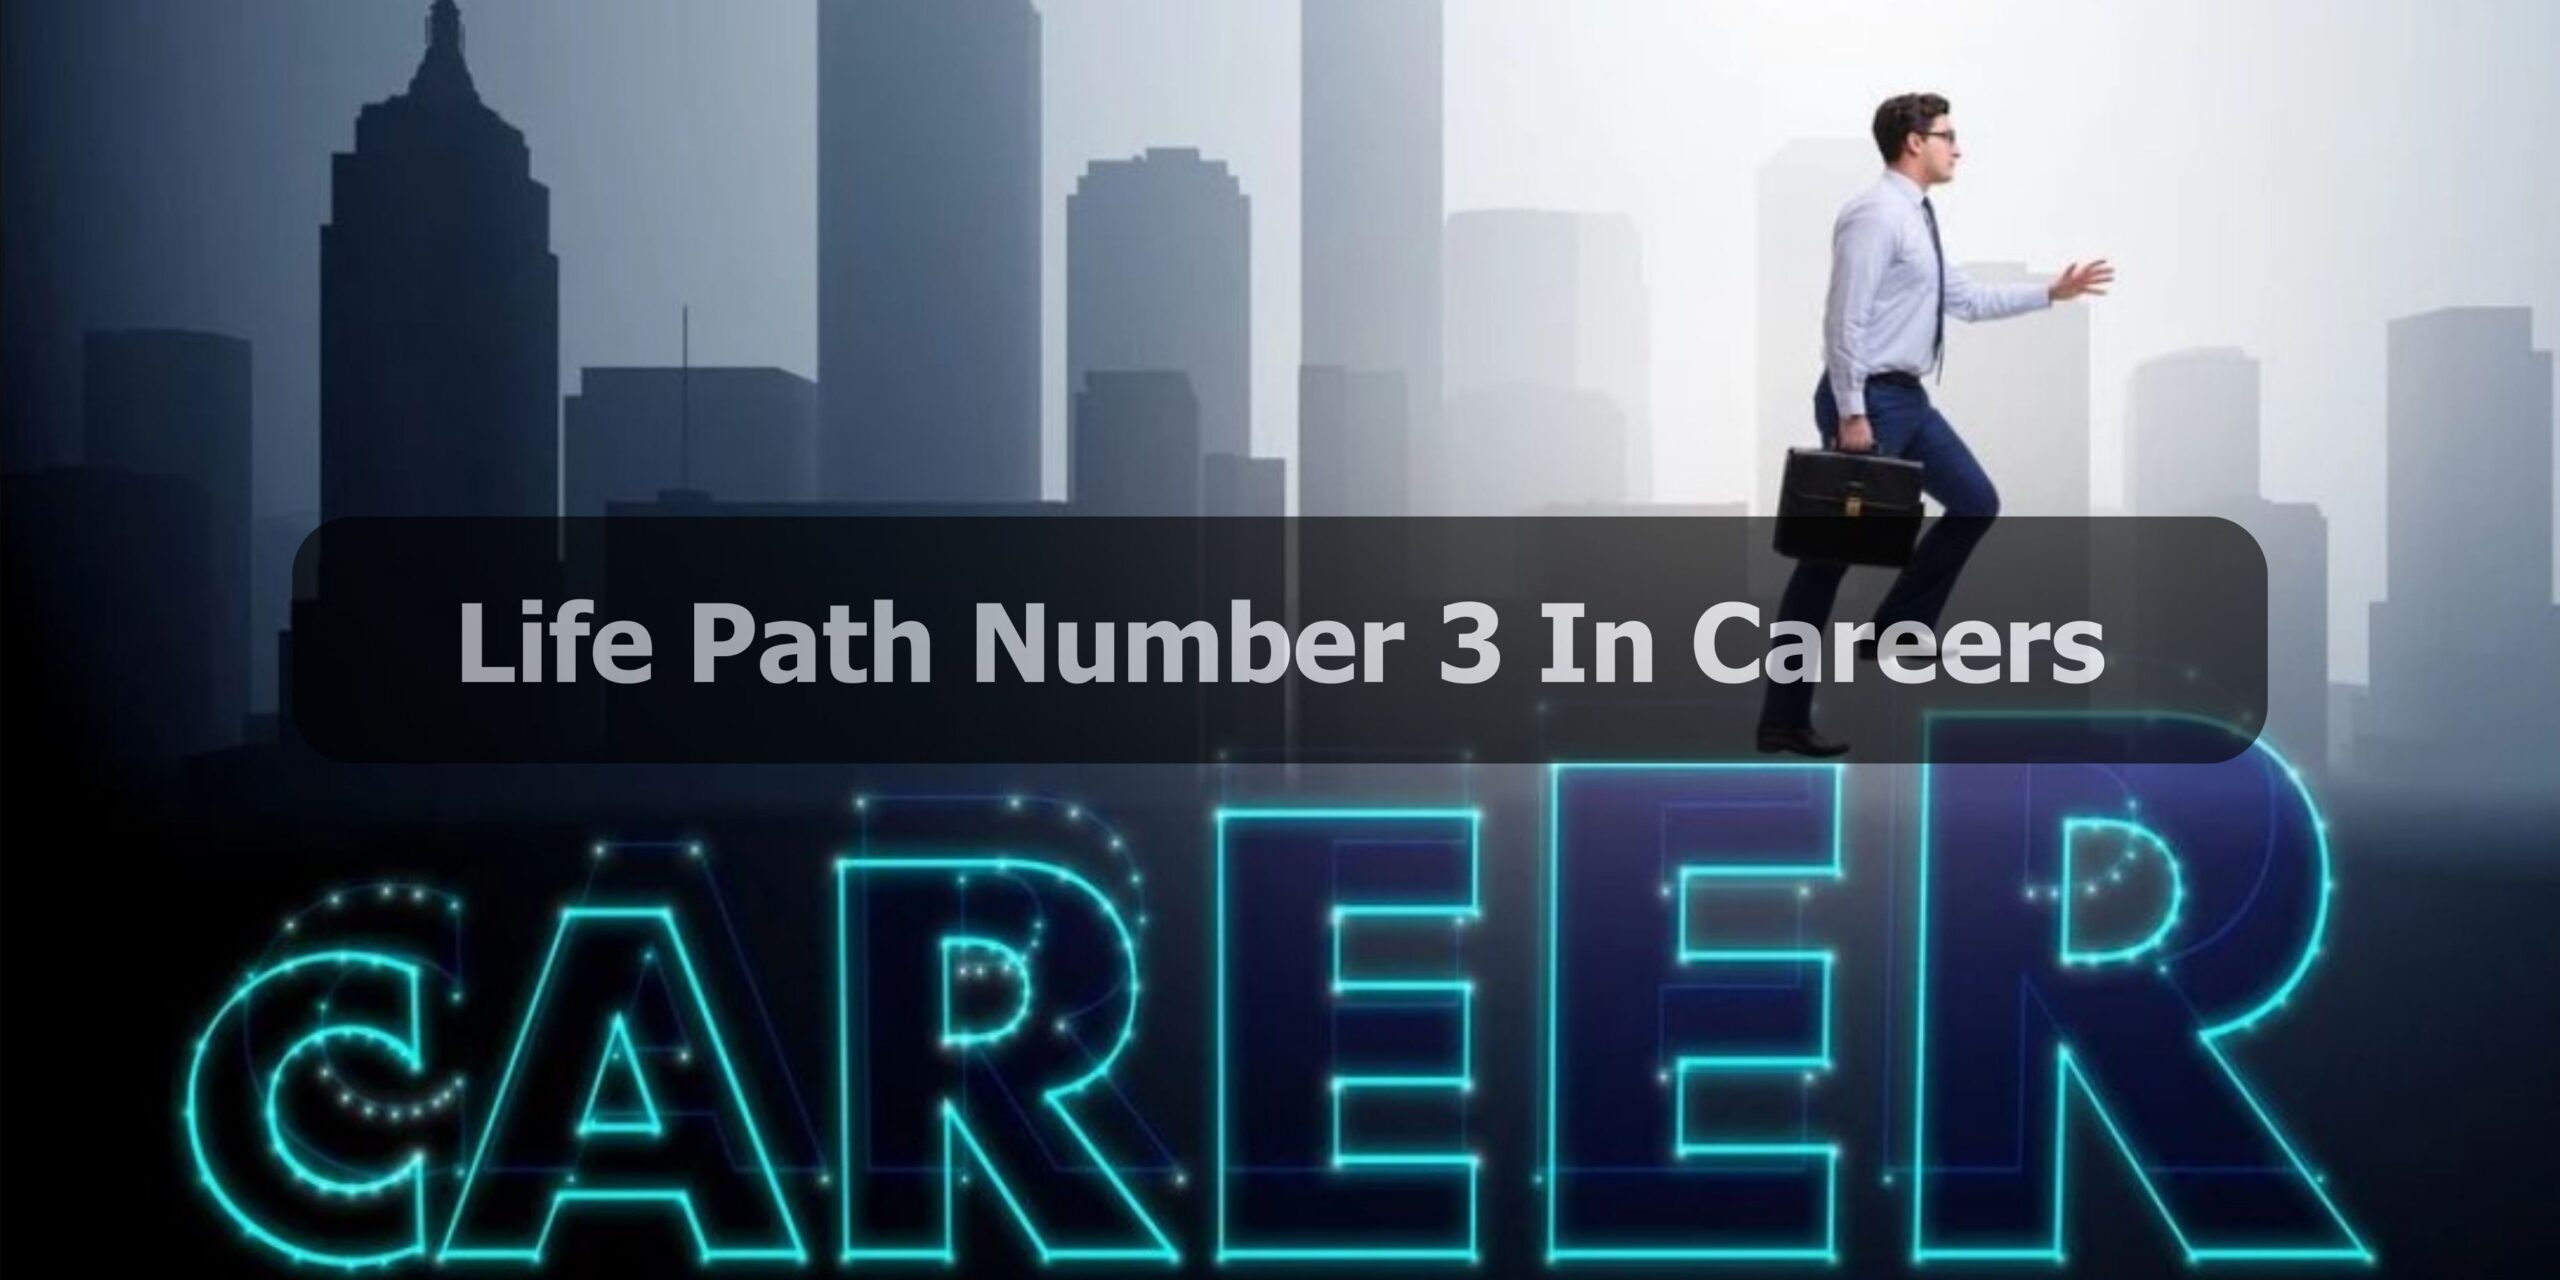 Life Path Number 3 In Careers